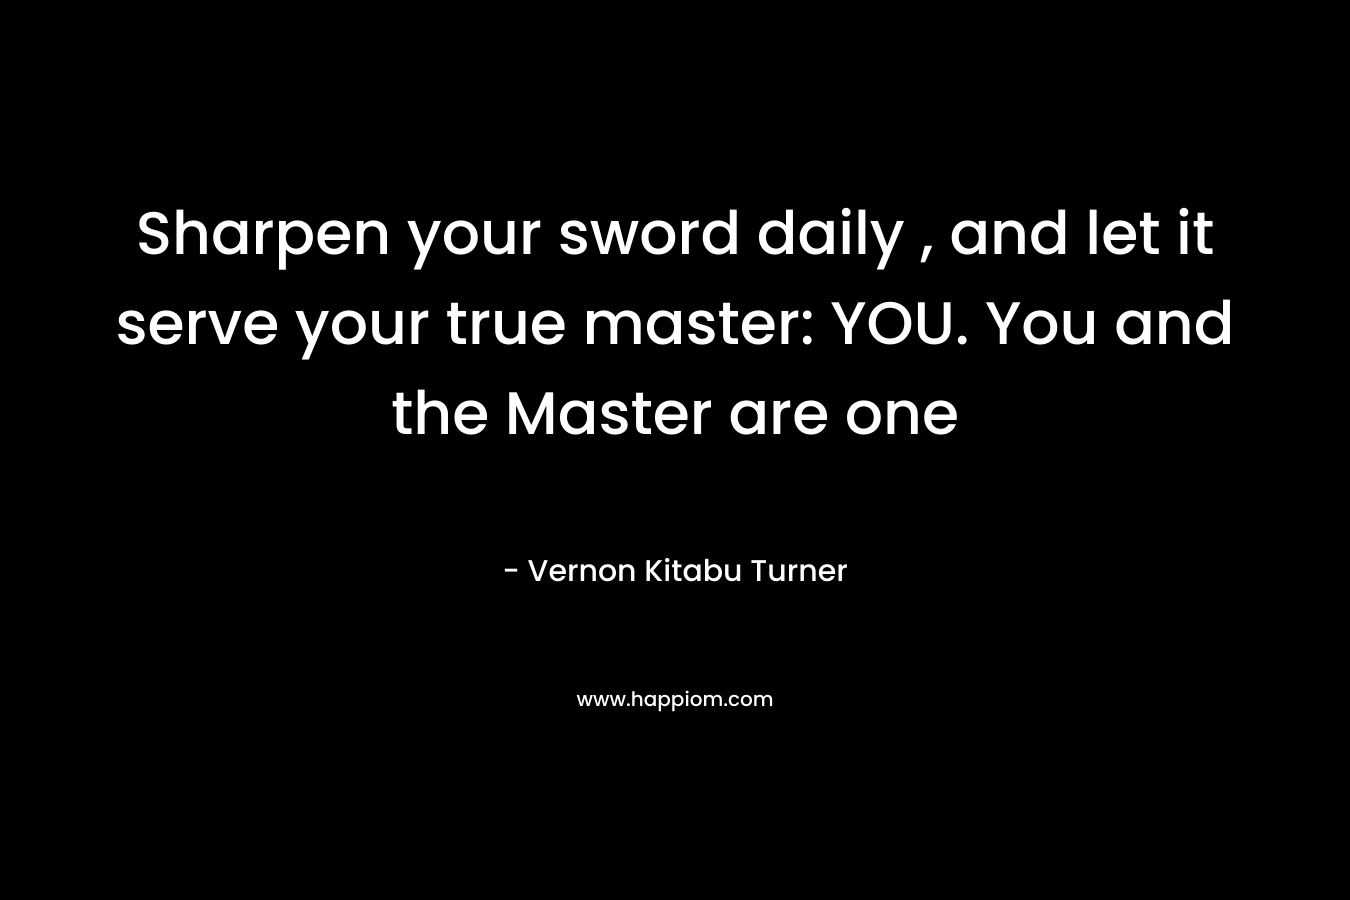 Sharpen your sword daily , and let it serve your true master: YOU. You and the Master are one